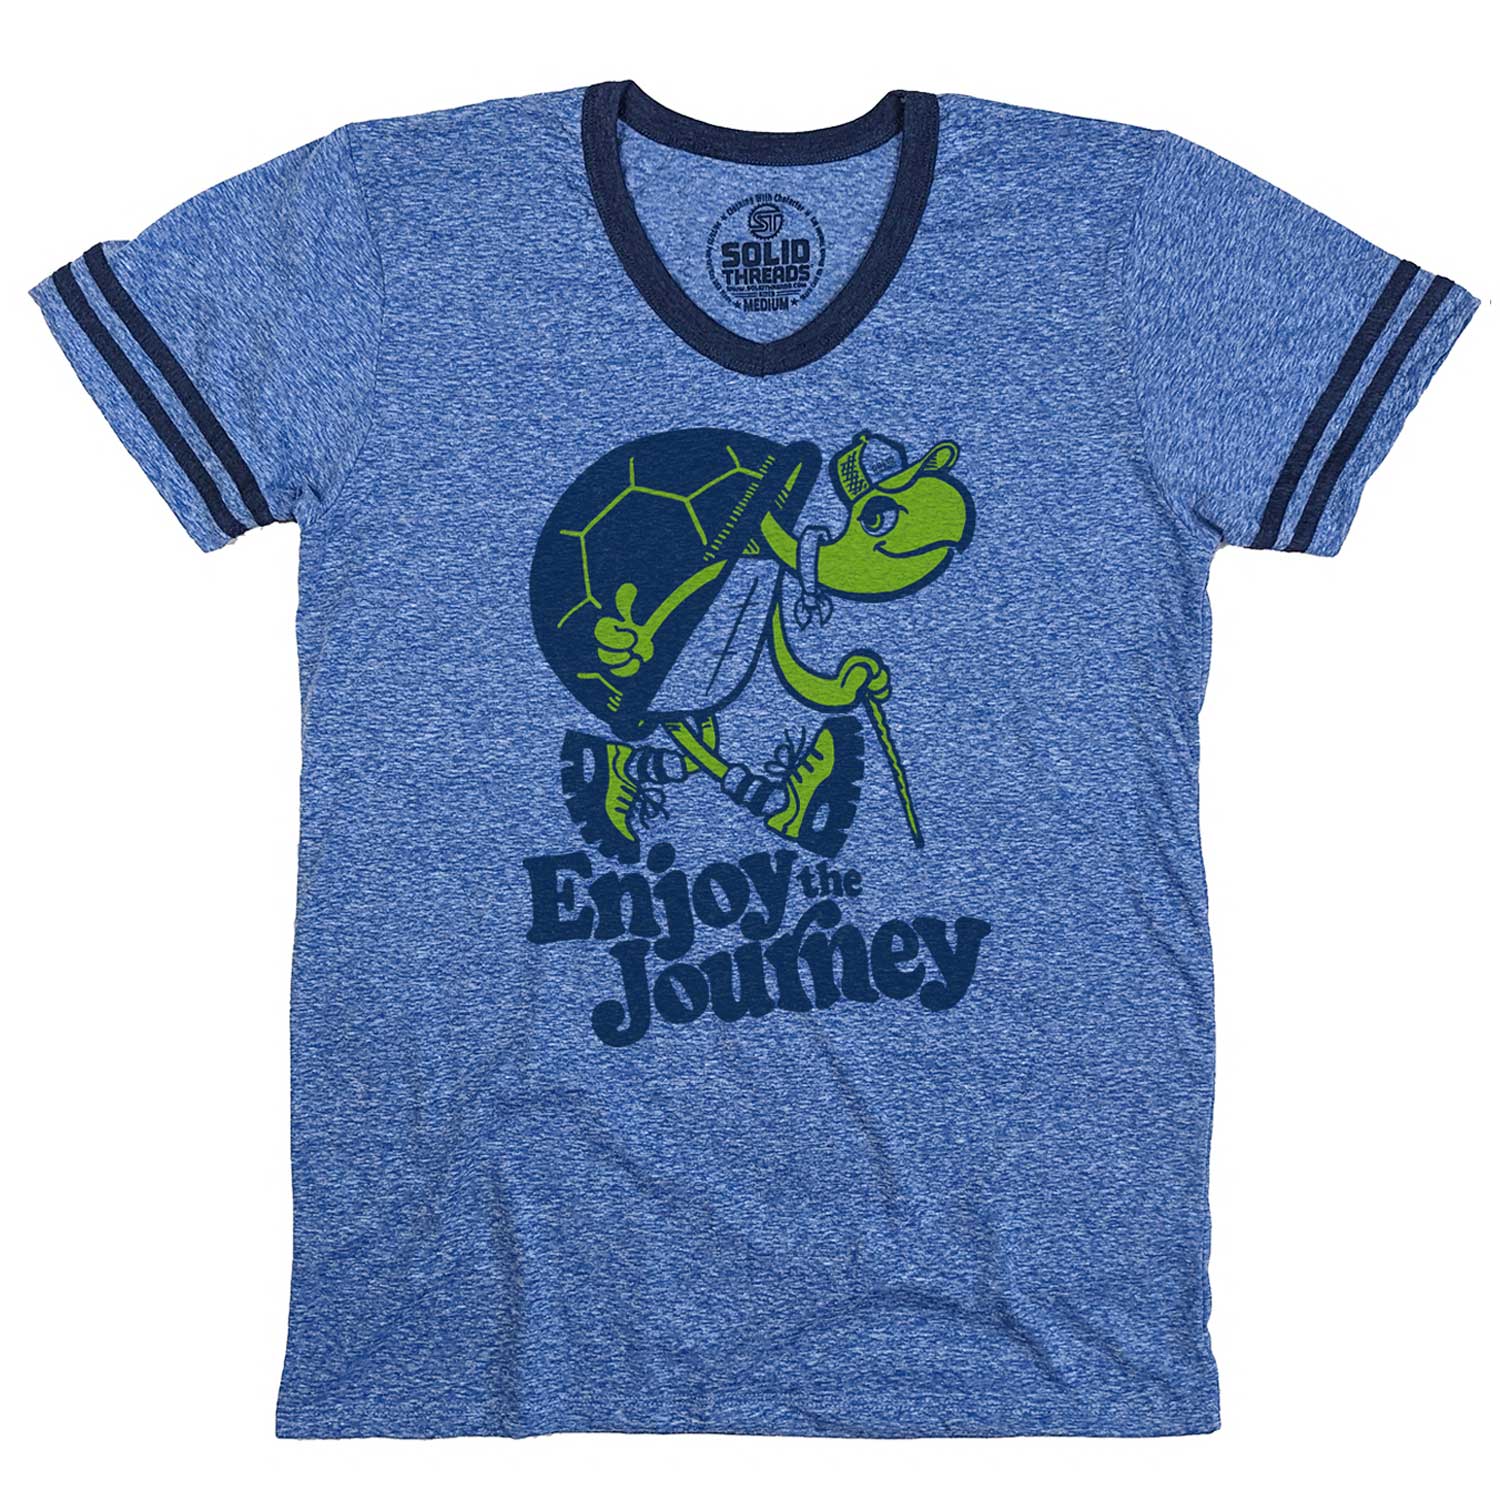 Men's Turtle Enjoy the Journey Vintage Graphic V-Neck Tee | Funny Turtle T-shirt | Solid Threads